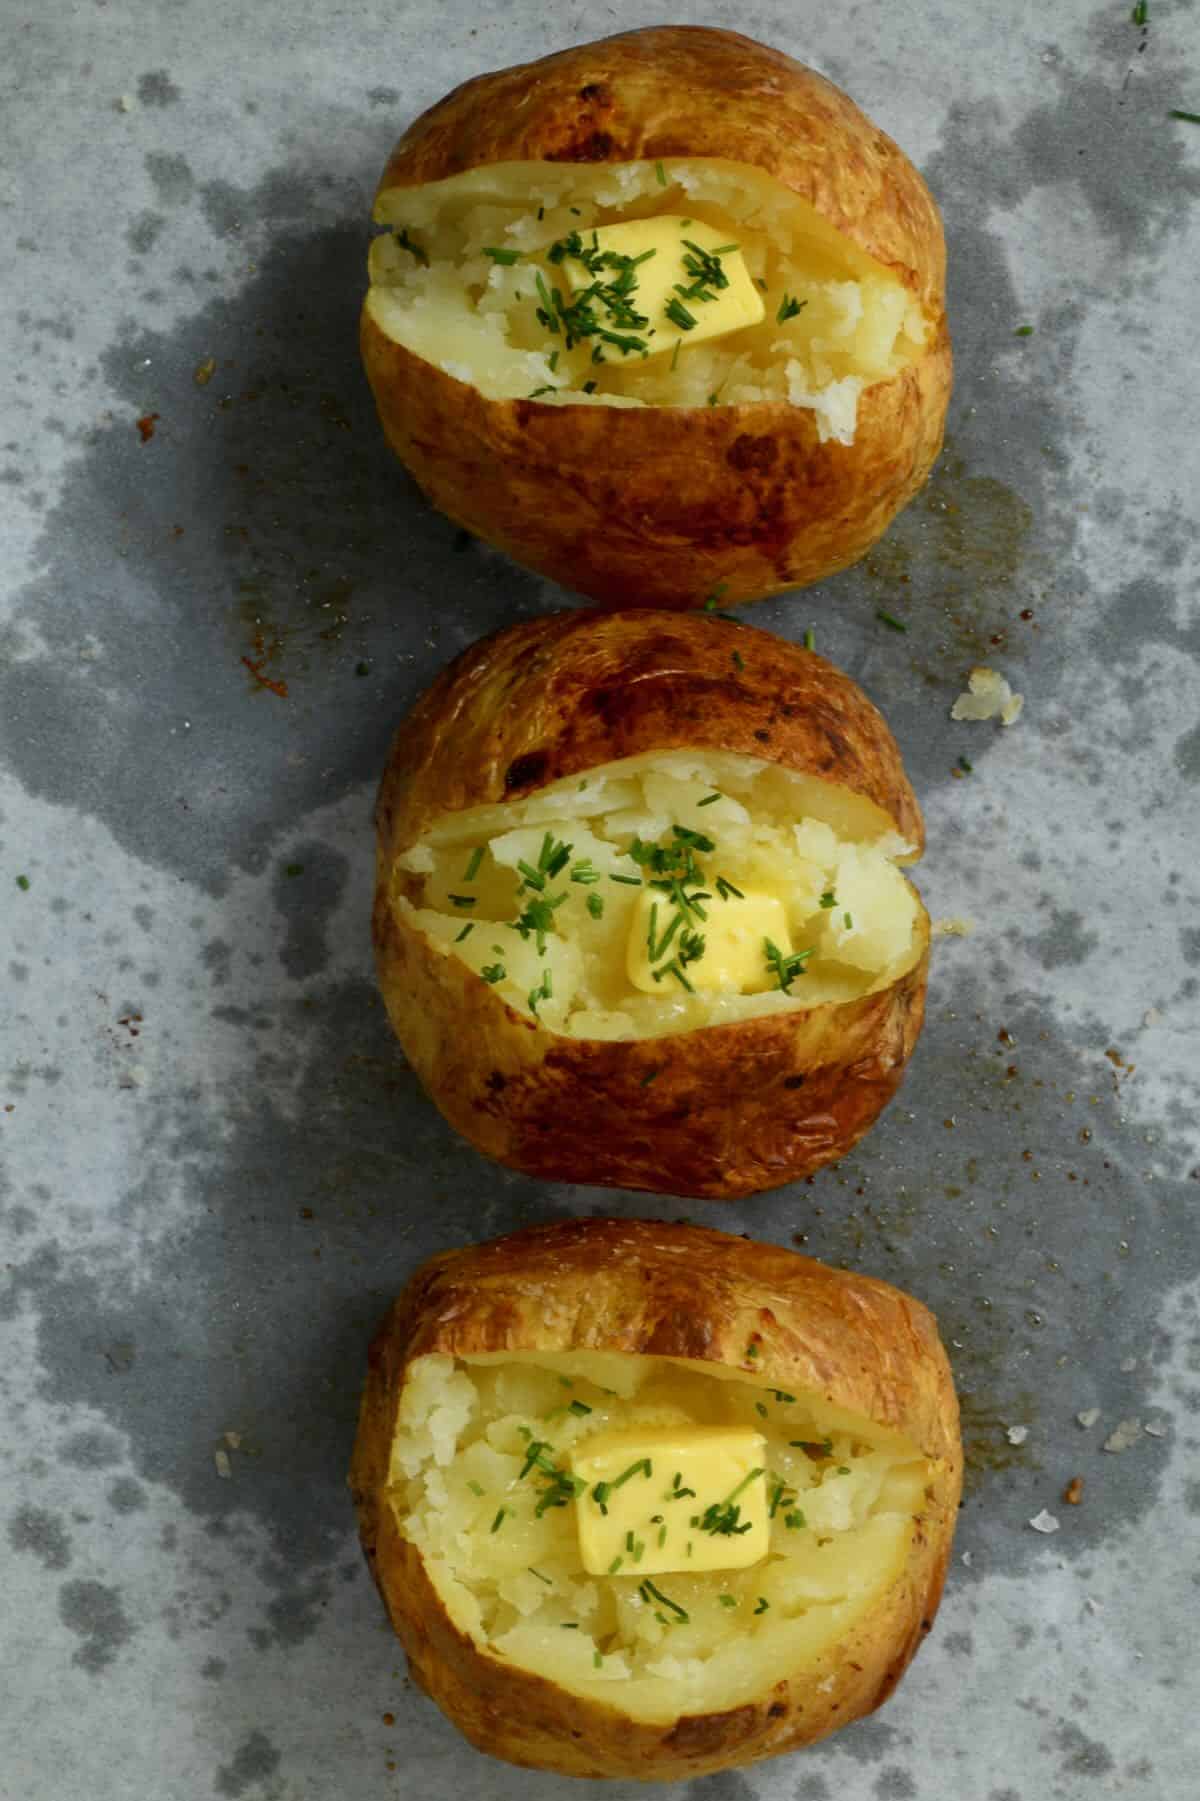 Three baked potatoes with some melted butter topped with chives